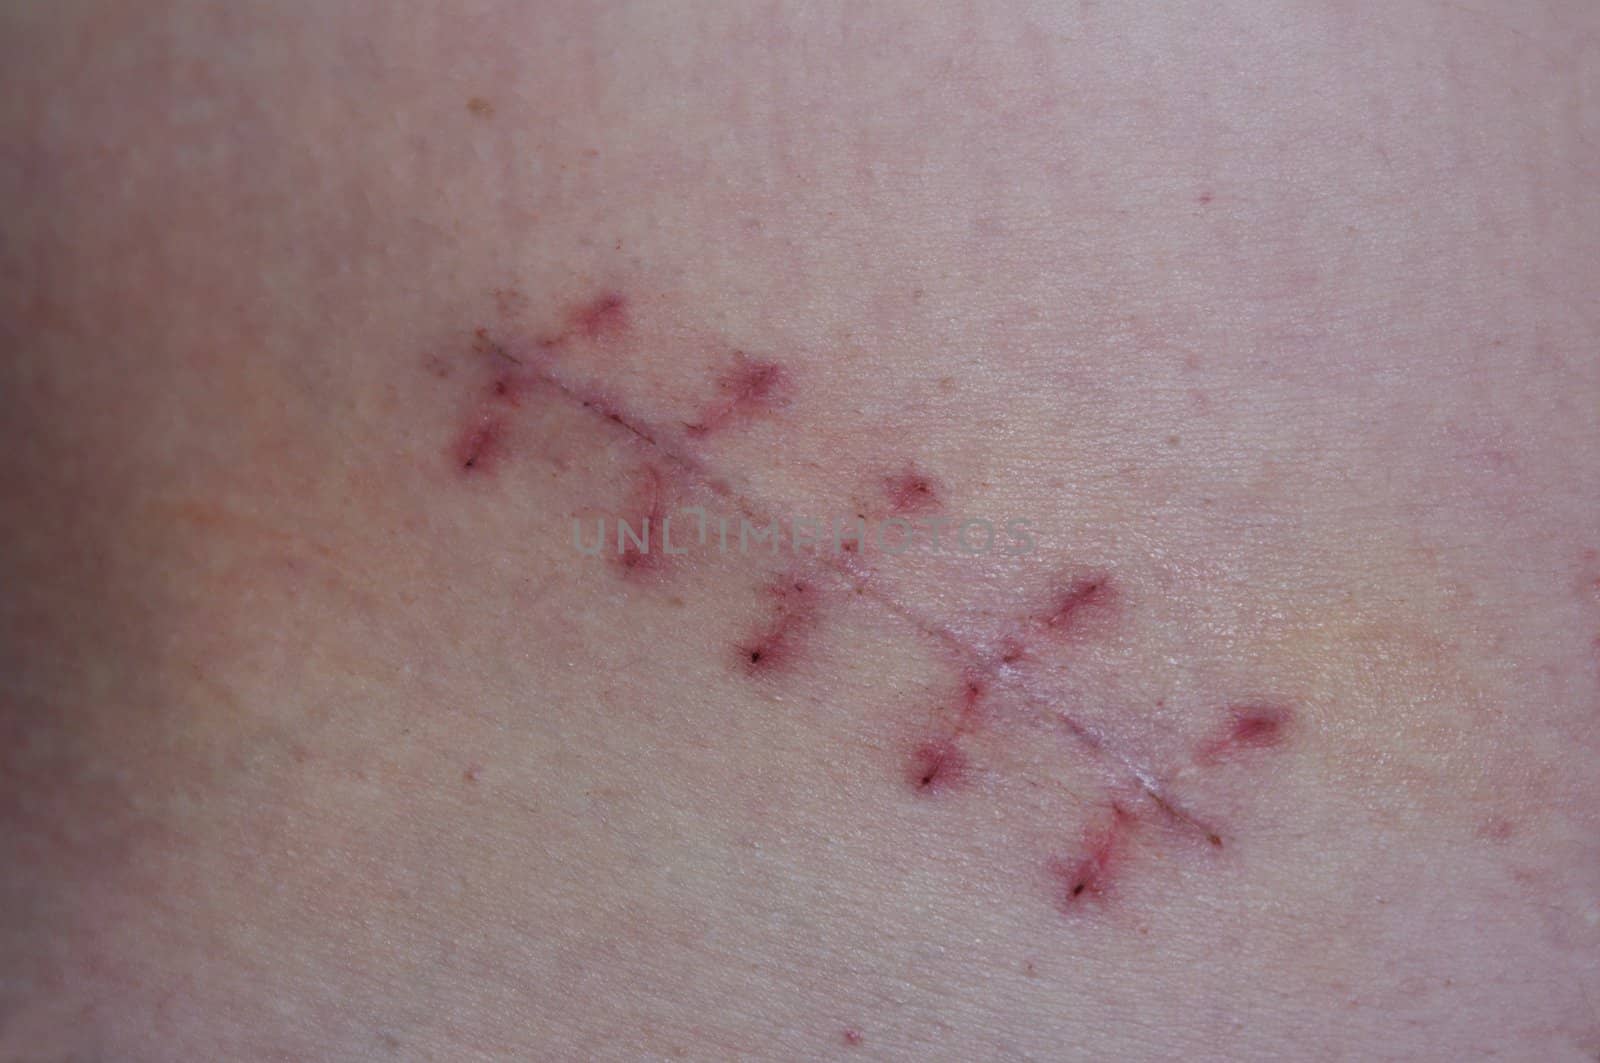 scar and seams after operation